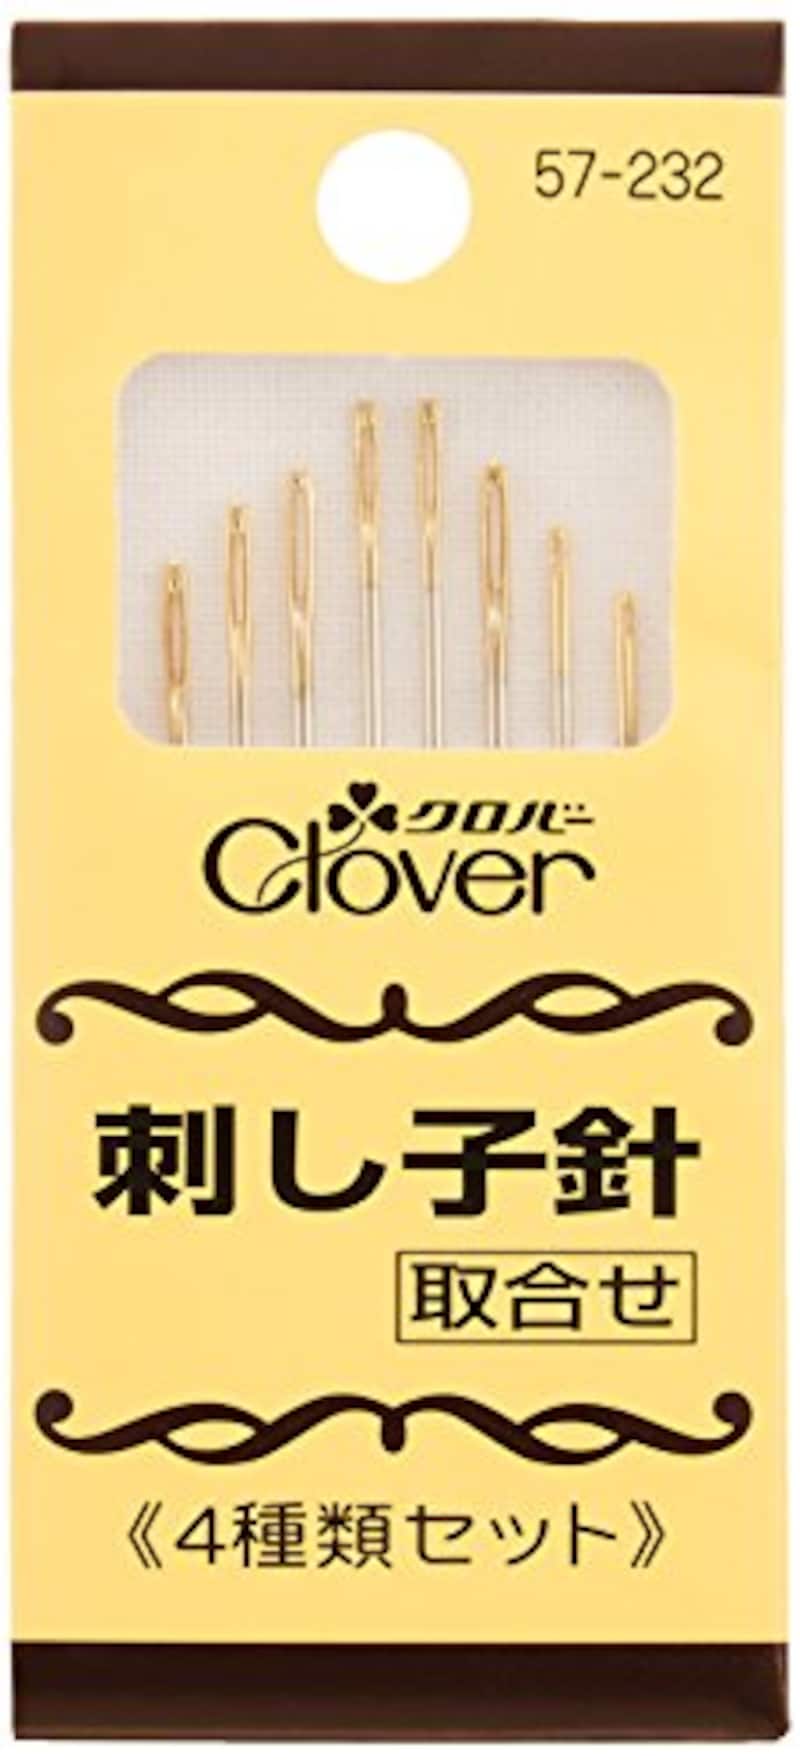 Clover,刺し子針,57ｰ232